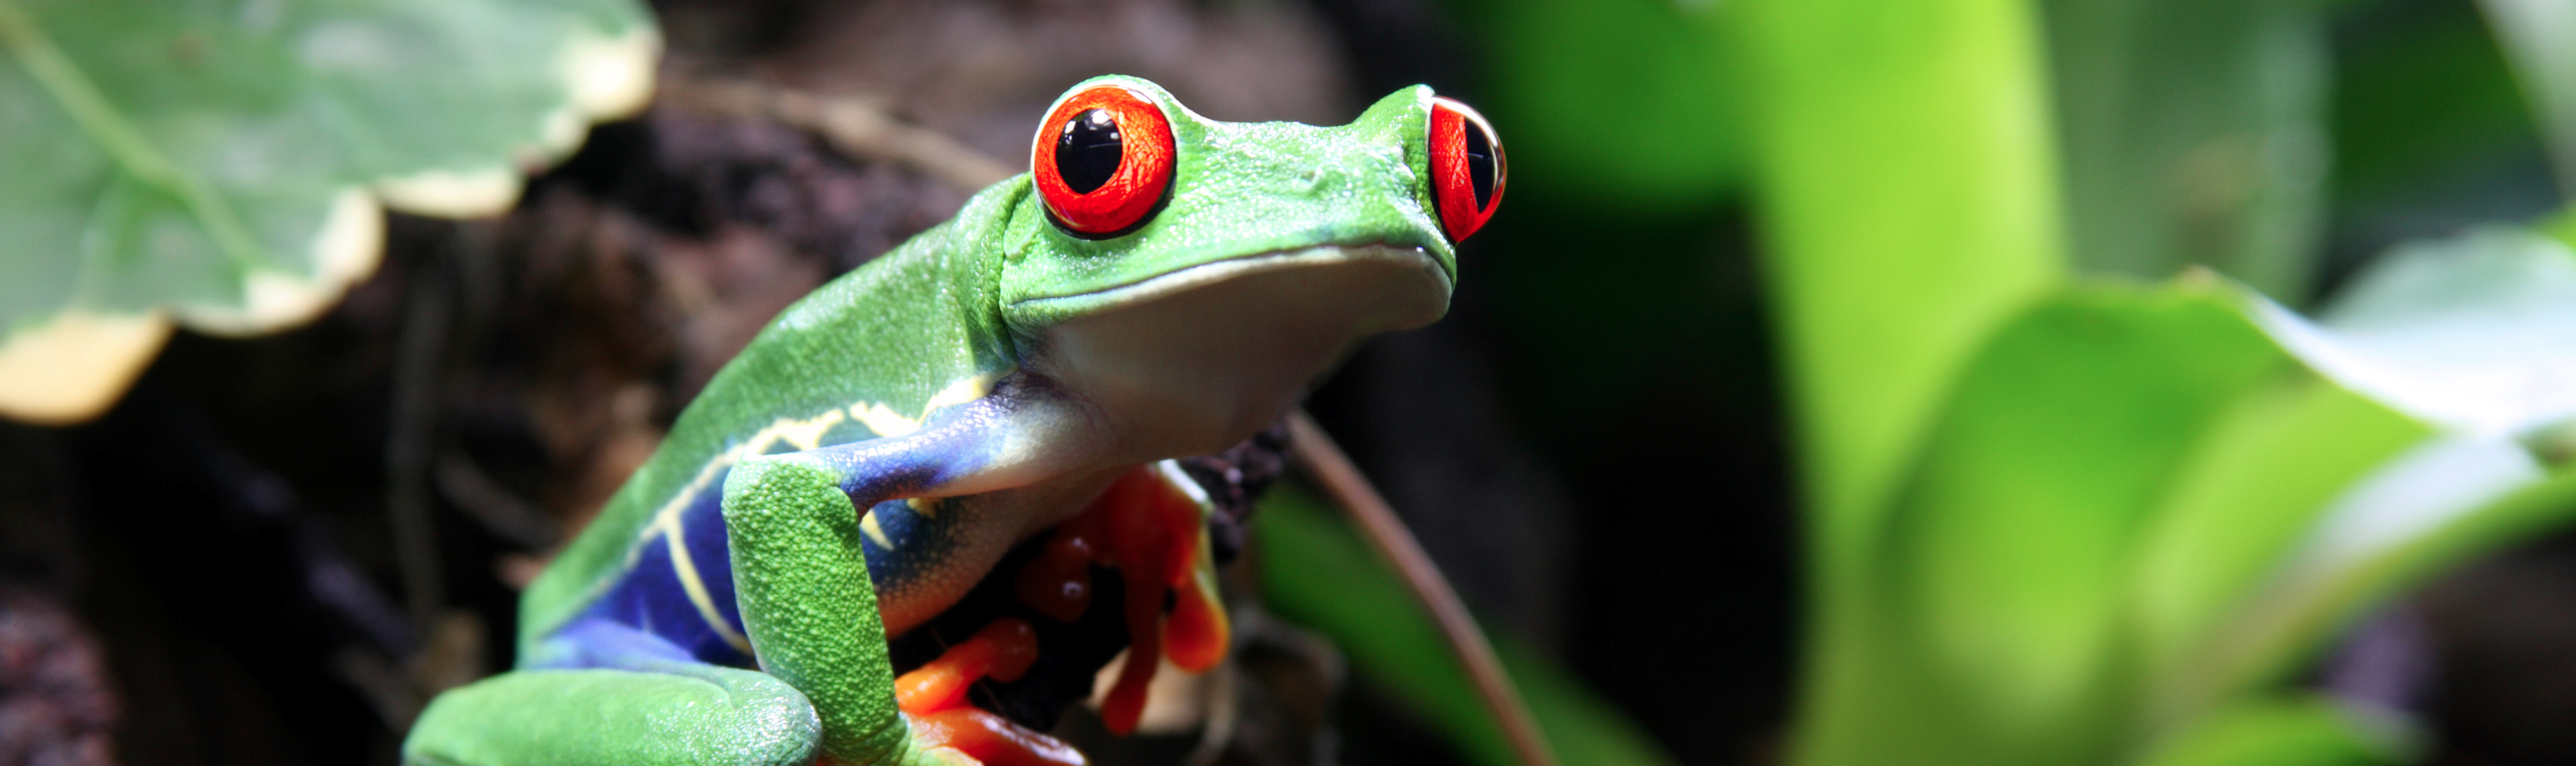 HQ Tree Frog Wallpapers | File 2249.09Kb